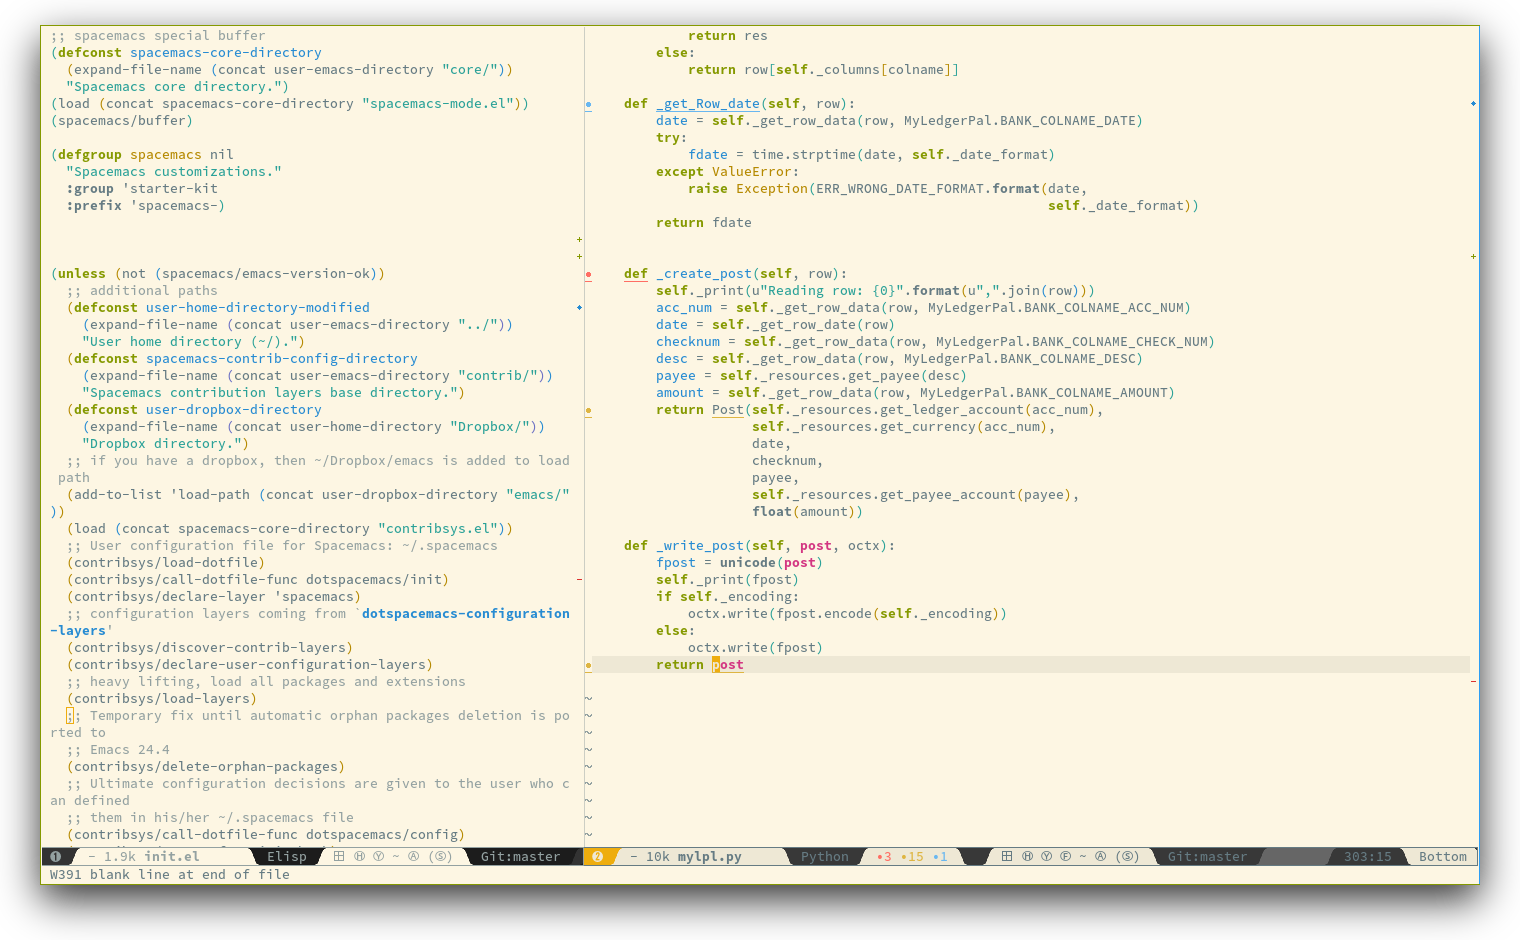 /TakeV/spacemacs/media/commit/7eeccc222d475e5148894ce33eefded5172c3324/doc/img/spacemacs-python.png